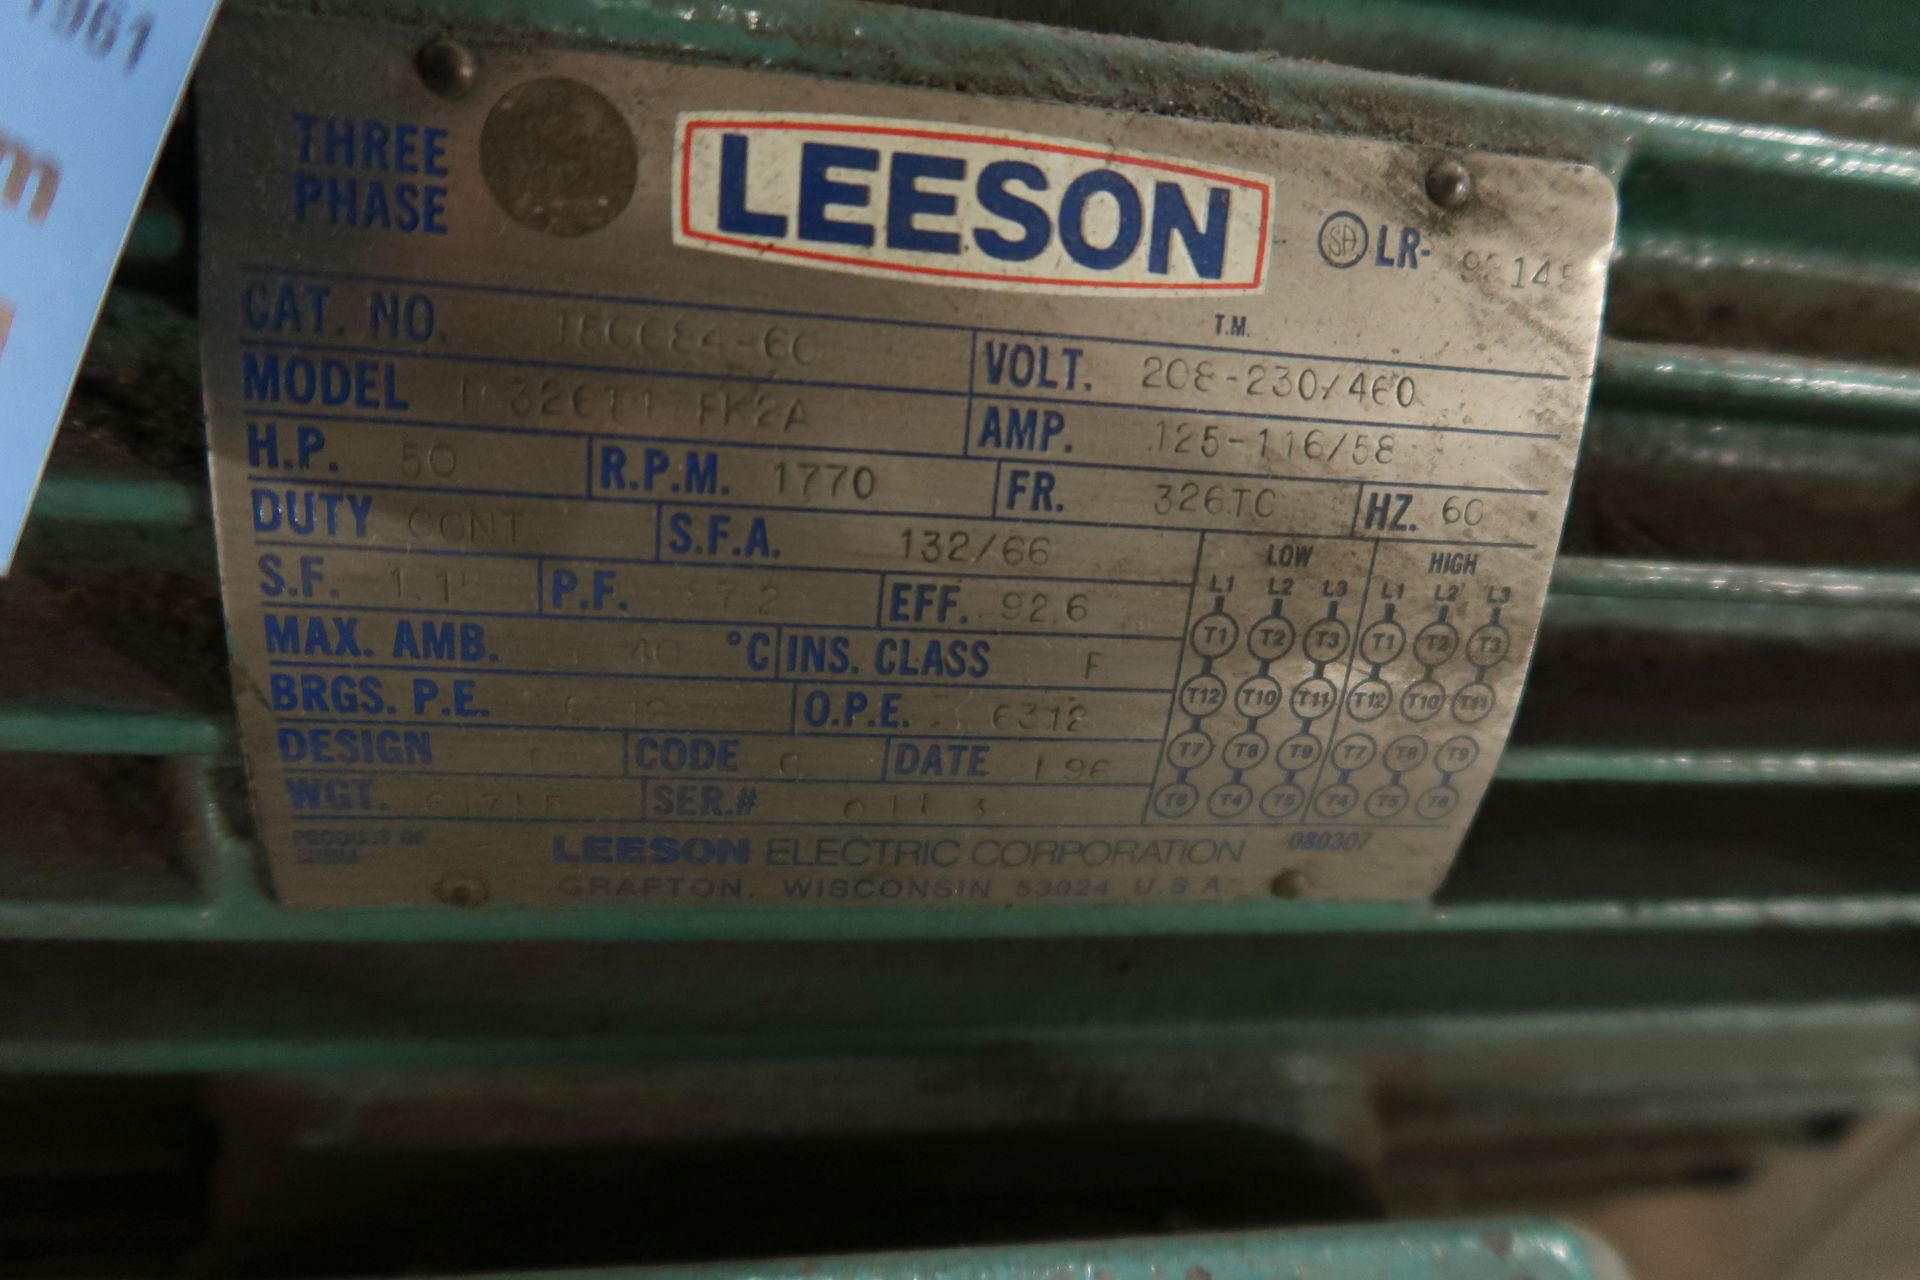 50-HP LEESON MODEL N326T17FK2A ELECTRIC MOTOR; 1,770 RPM, 208/230/460 VOLT, REPORTED TO BE SPARE - Image 2 of 2